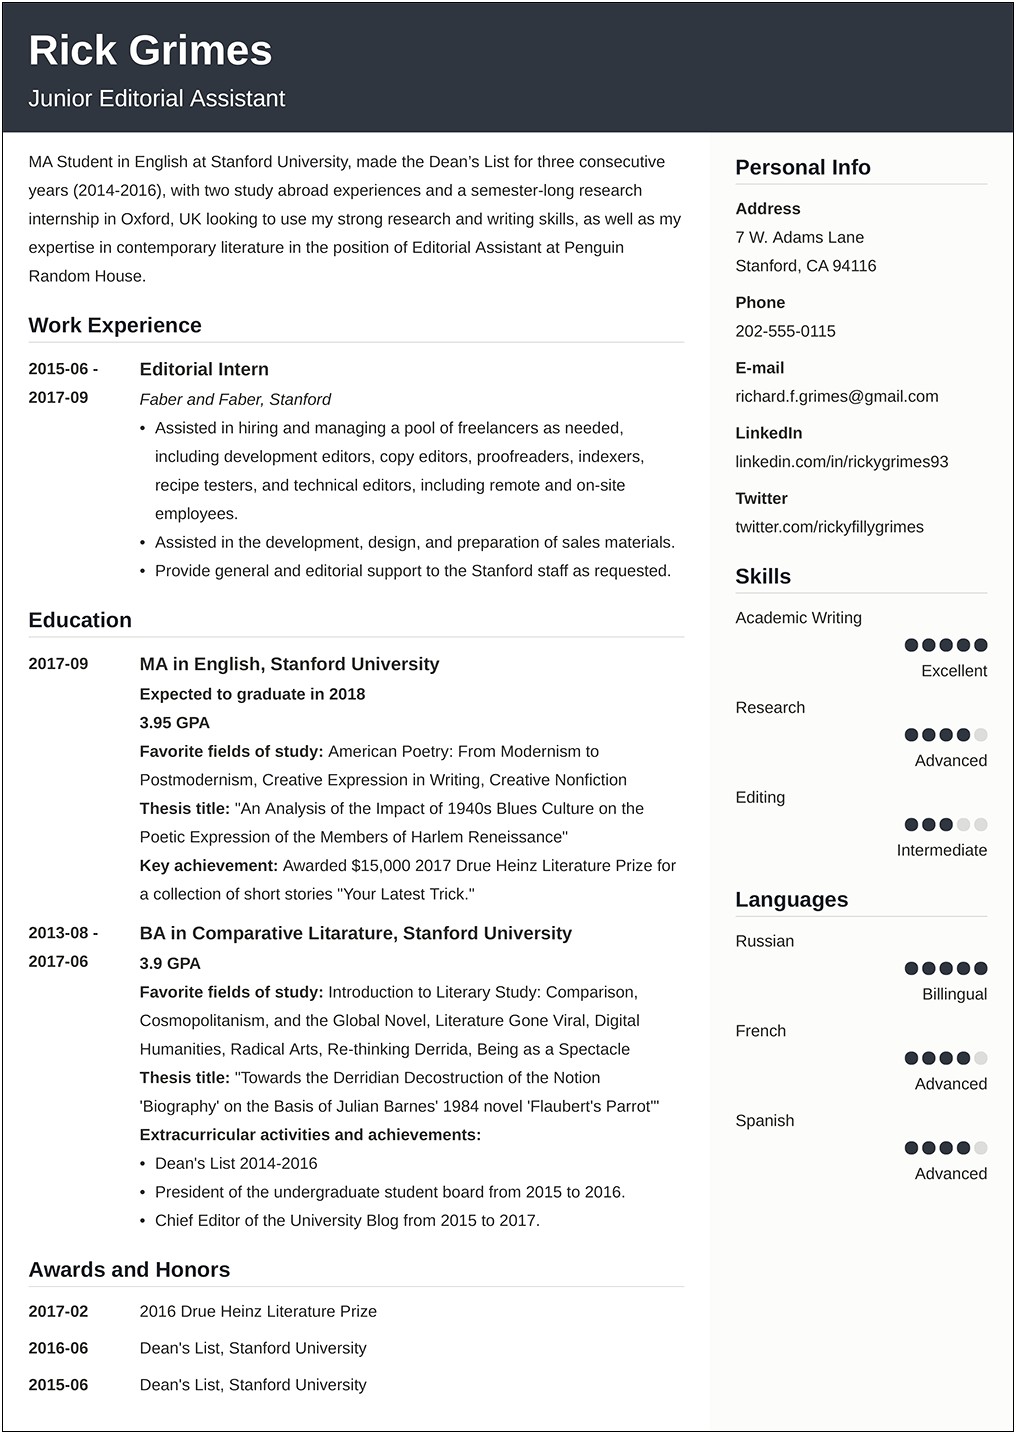 Where Can I Find Resume Examples